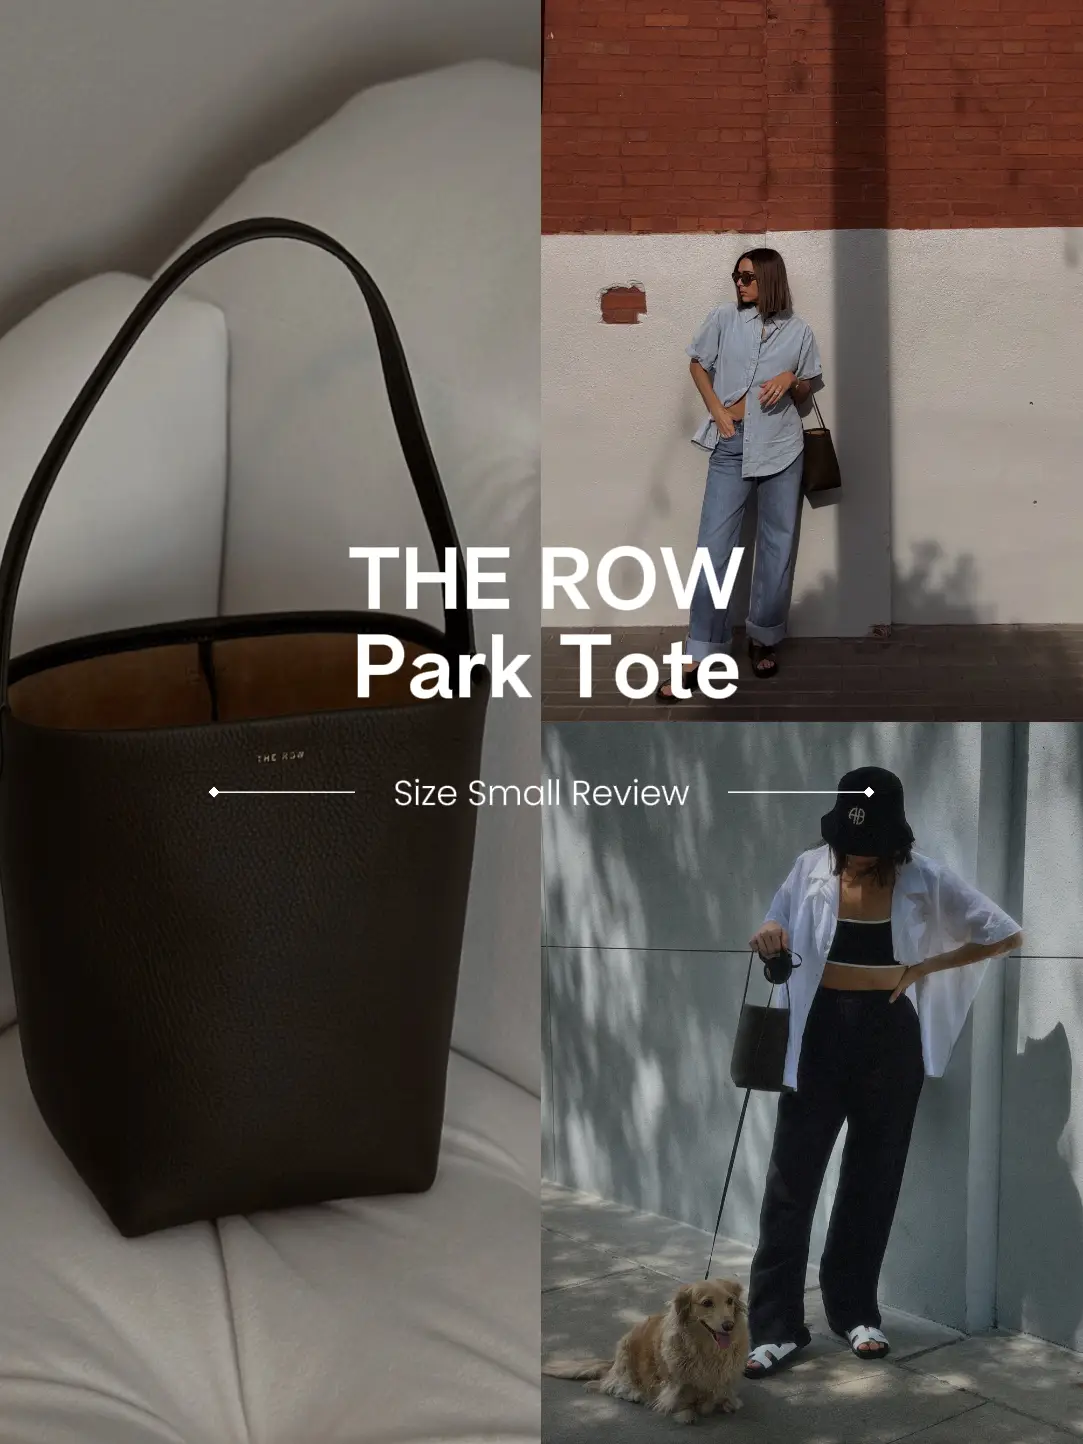 The Row Park Tote Size Small Review